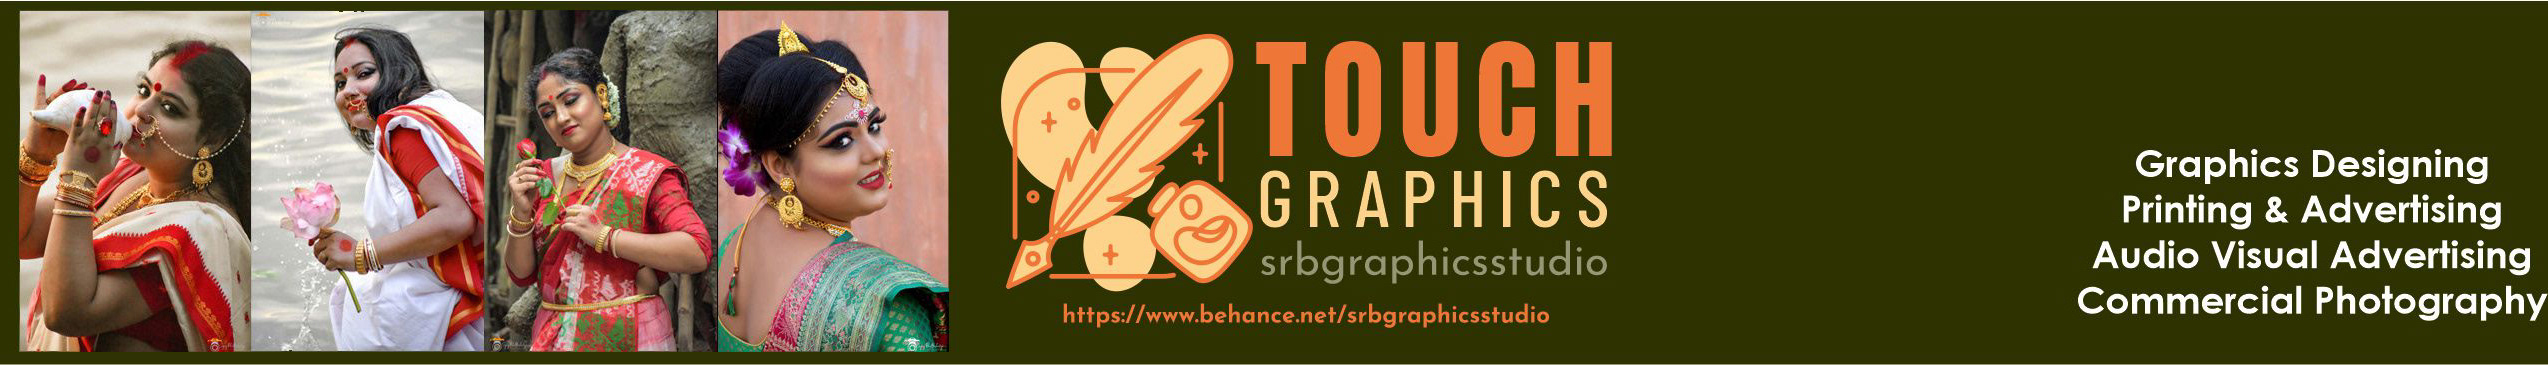 Touch Graphics's profile banner